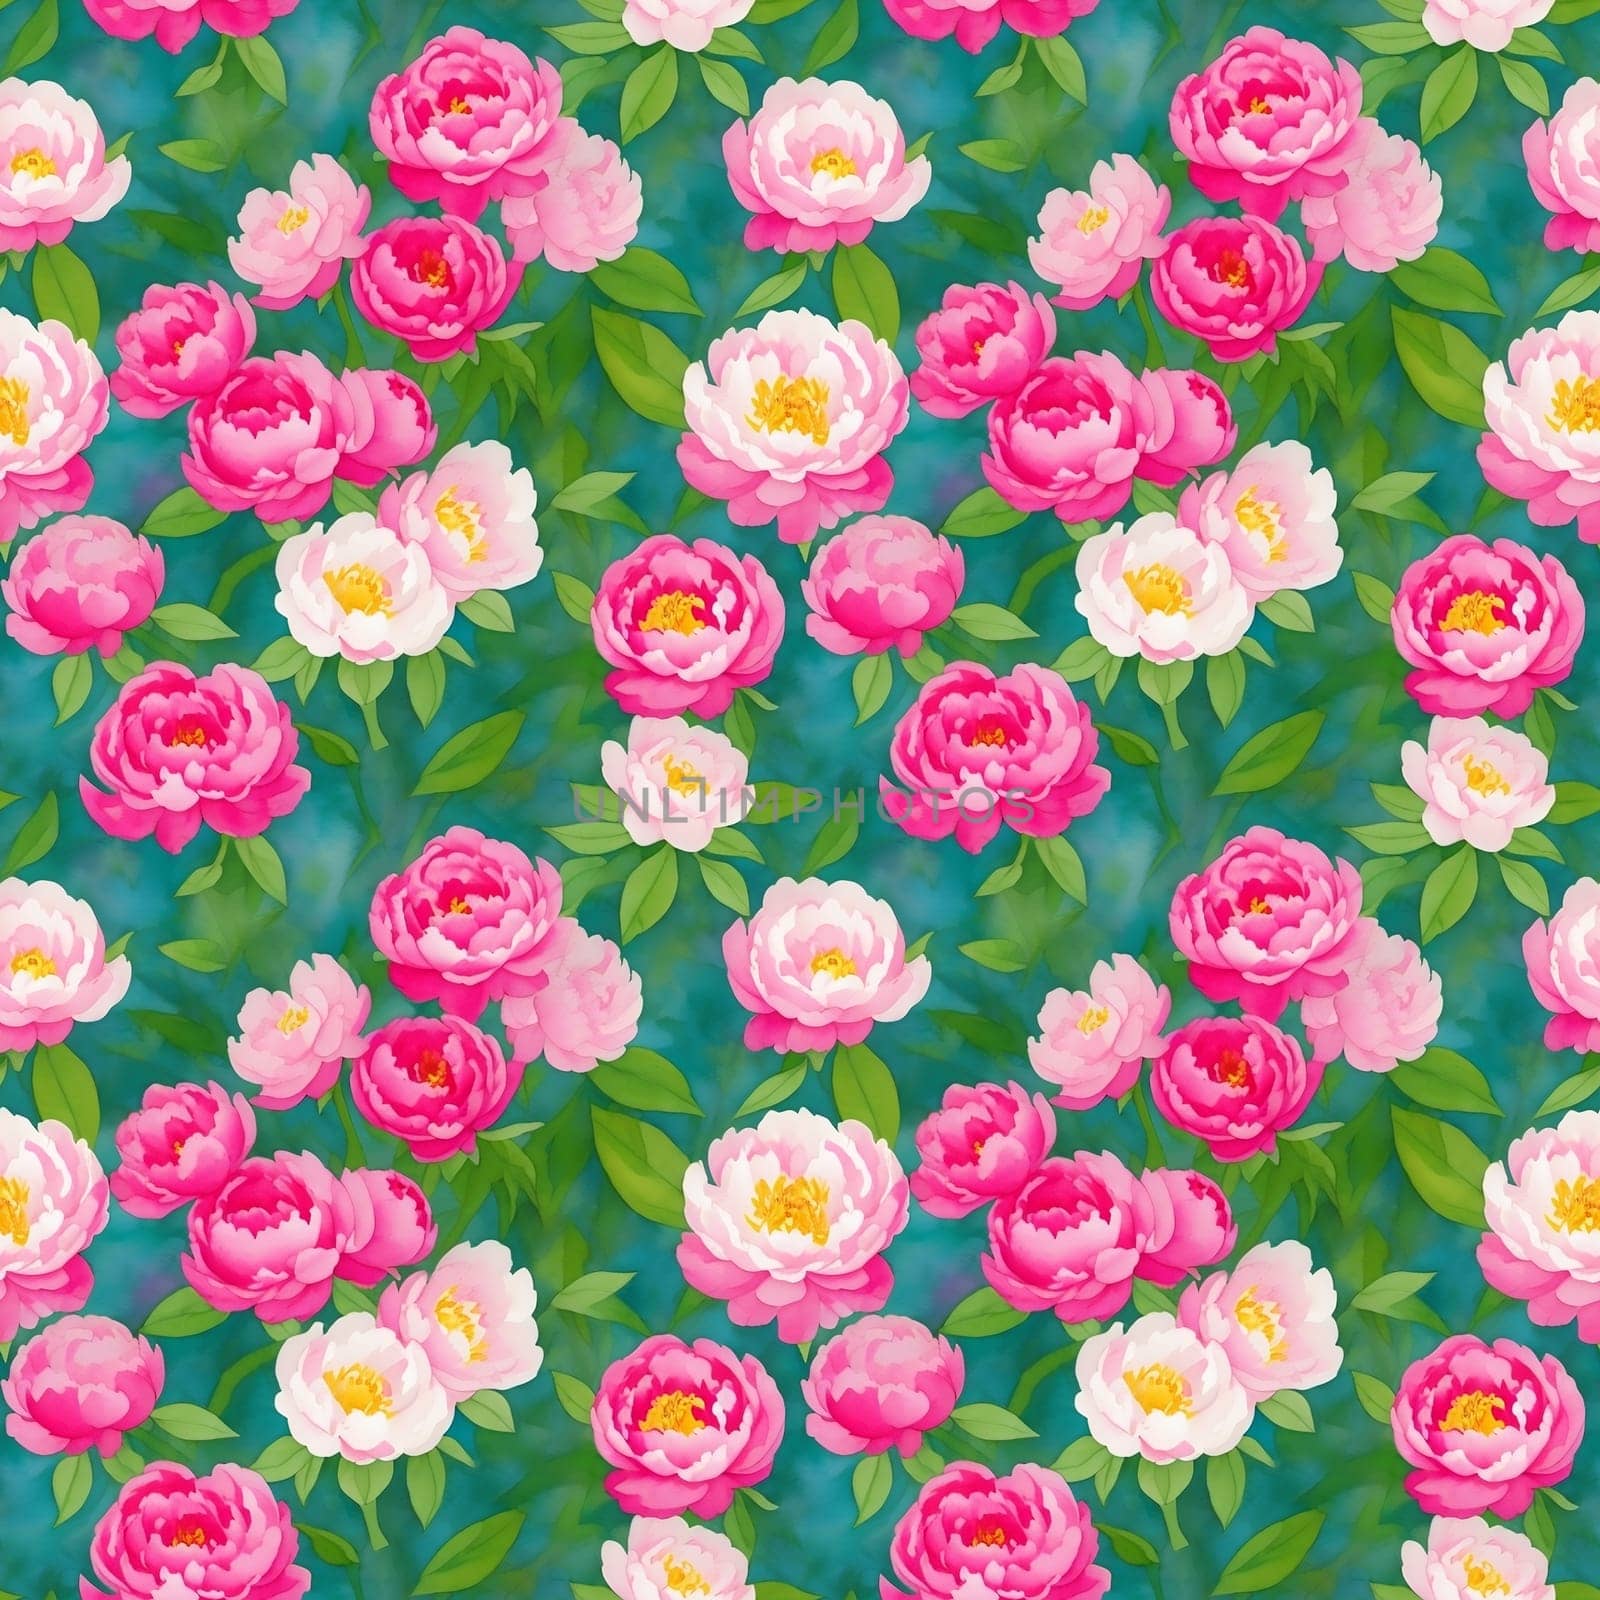 Watercolor Floral Seamless Pattern with White and Pink Peonies with Green Leaves on Teal by LanaLeta